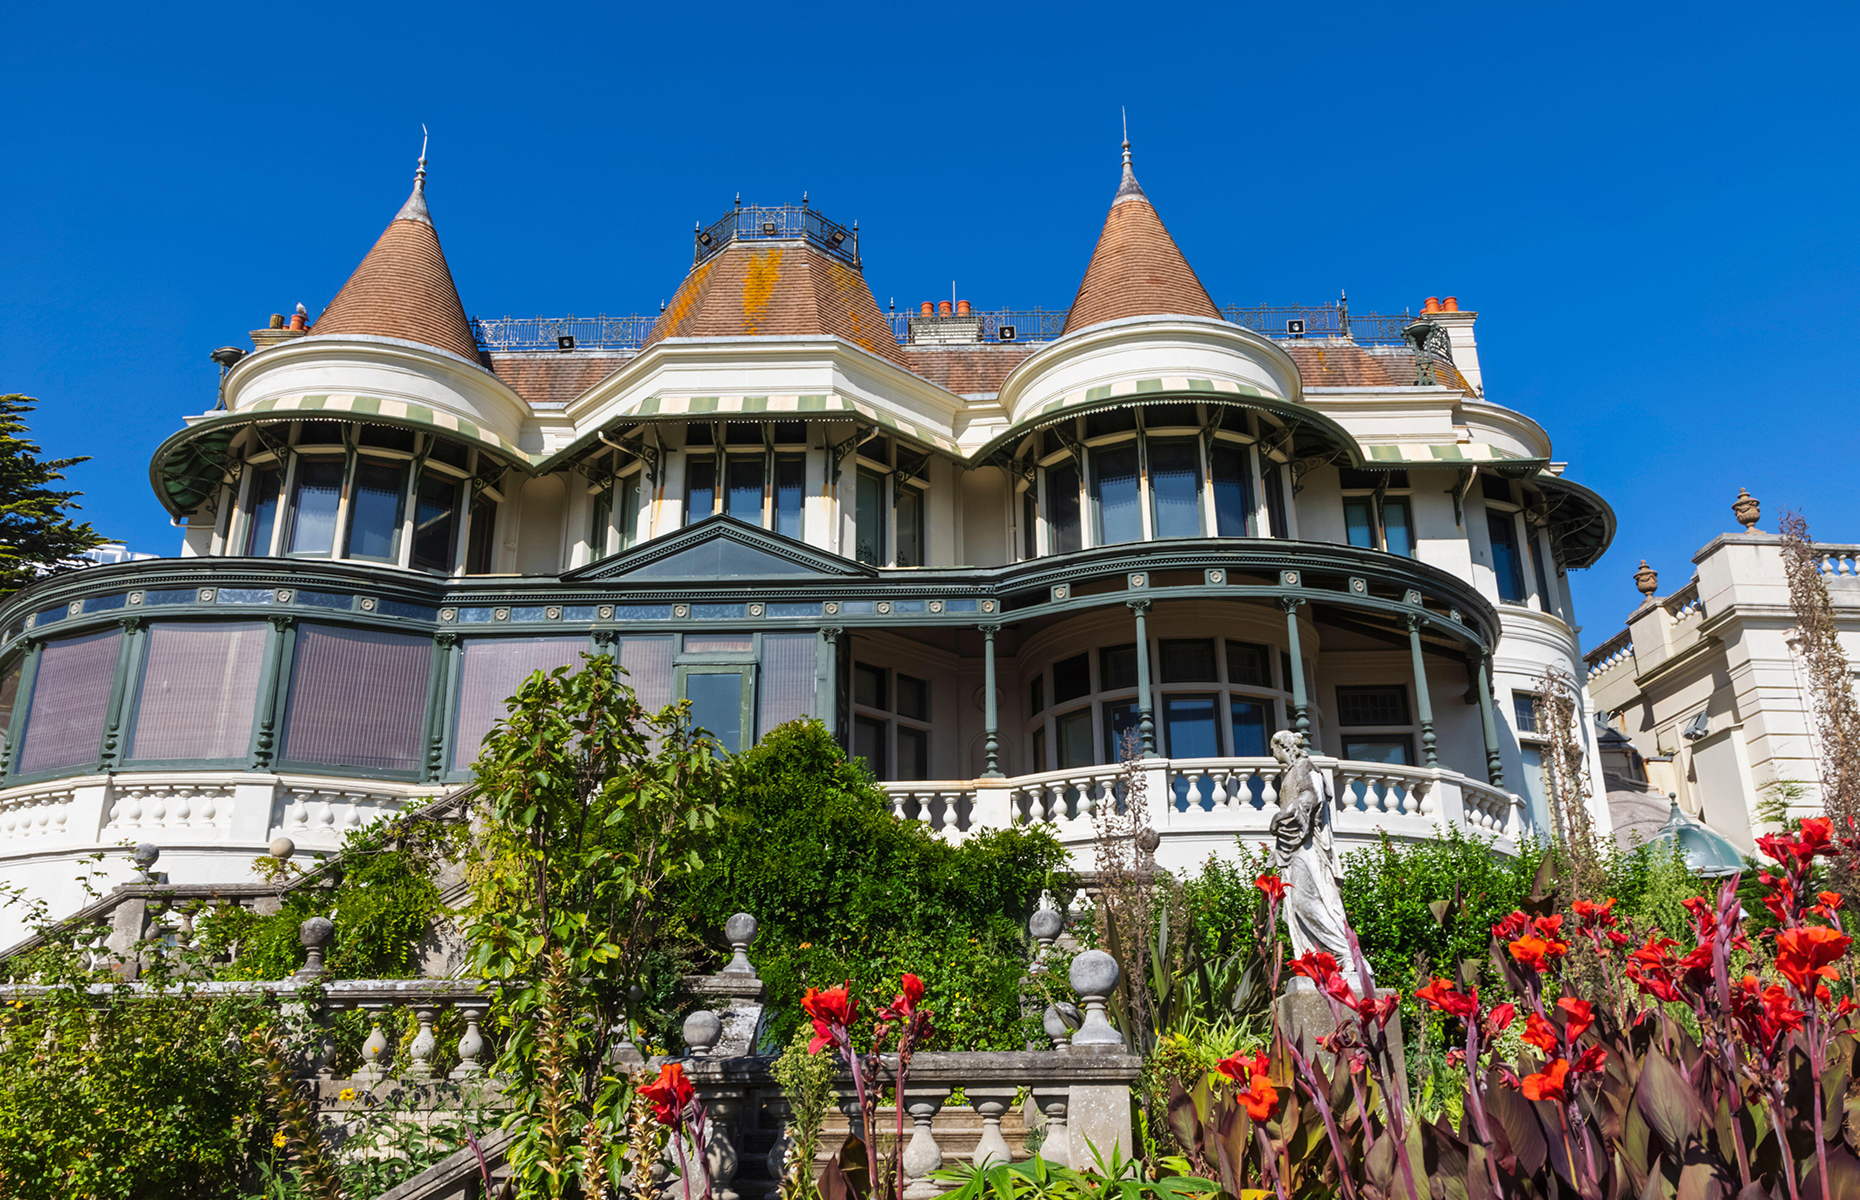 Russel-Cotes Museum, Bournemouth, England (Image: Mauritius images GmbH/Alamy Stock Photo)